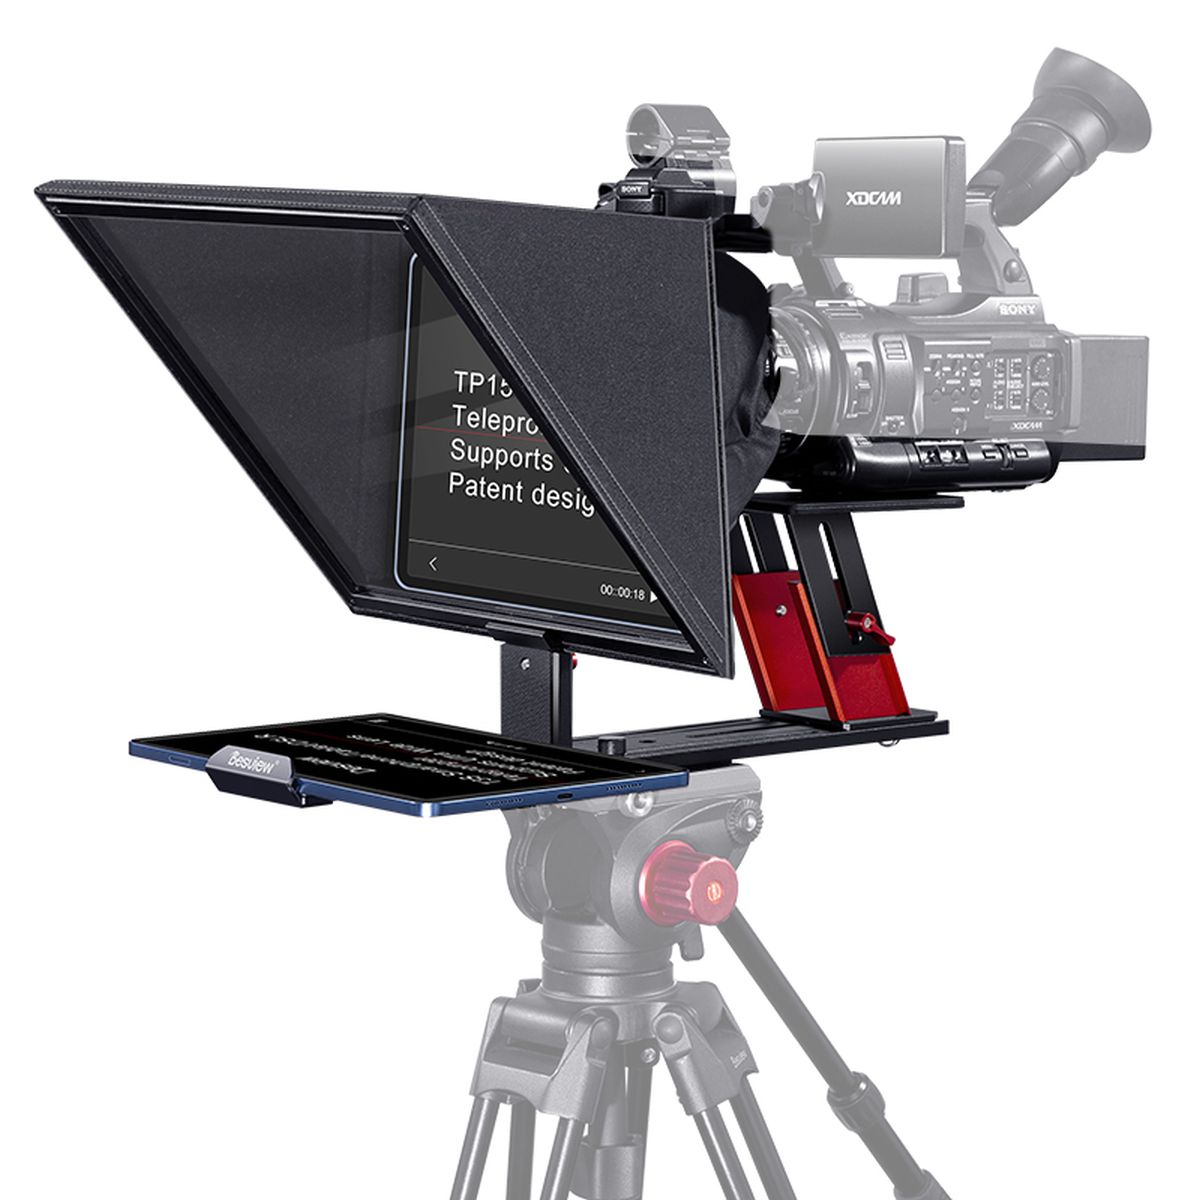 Desview TP 150 Teleprompter